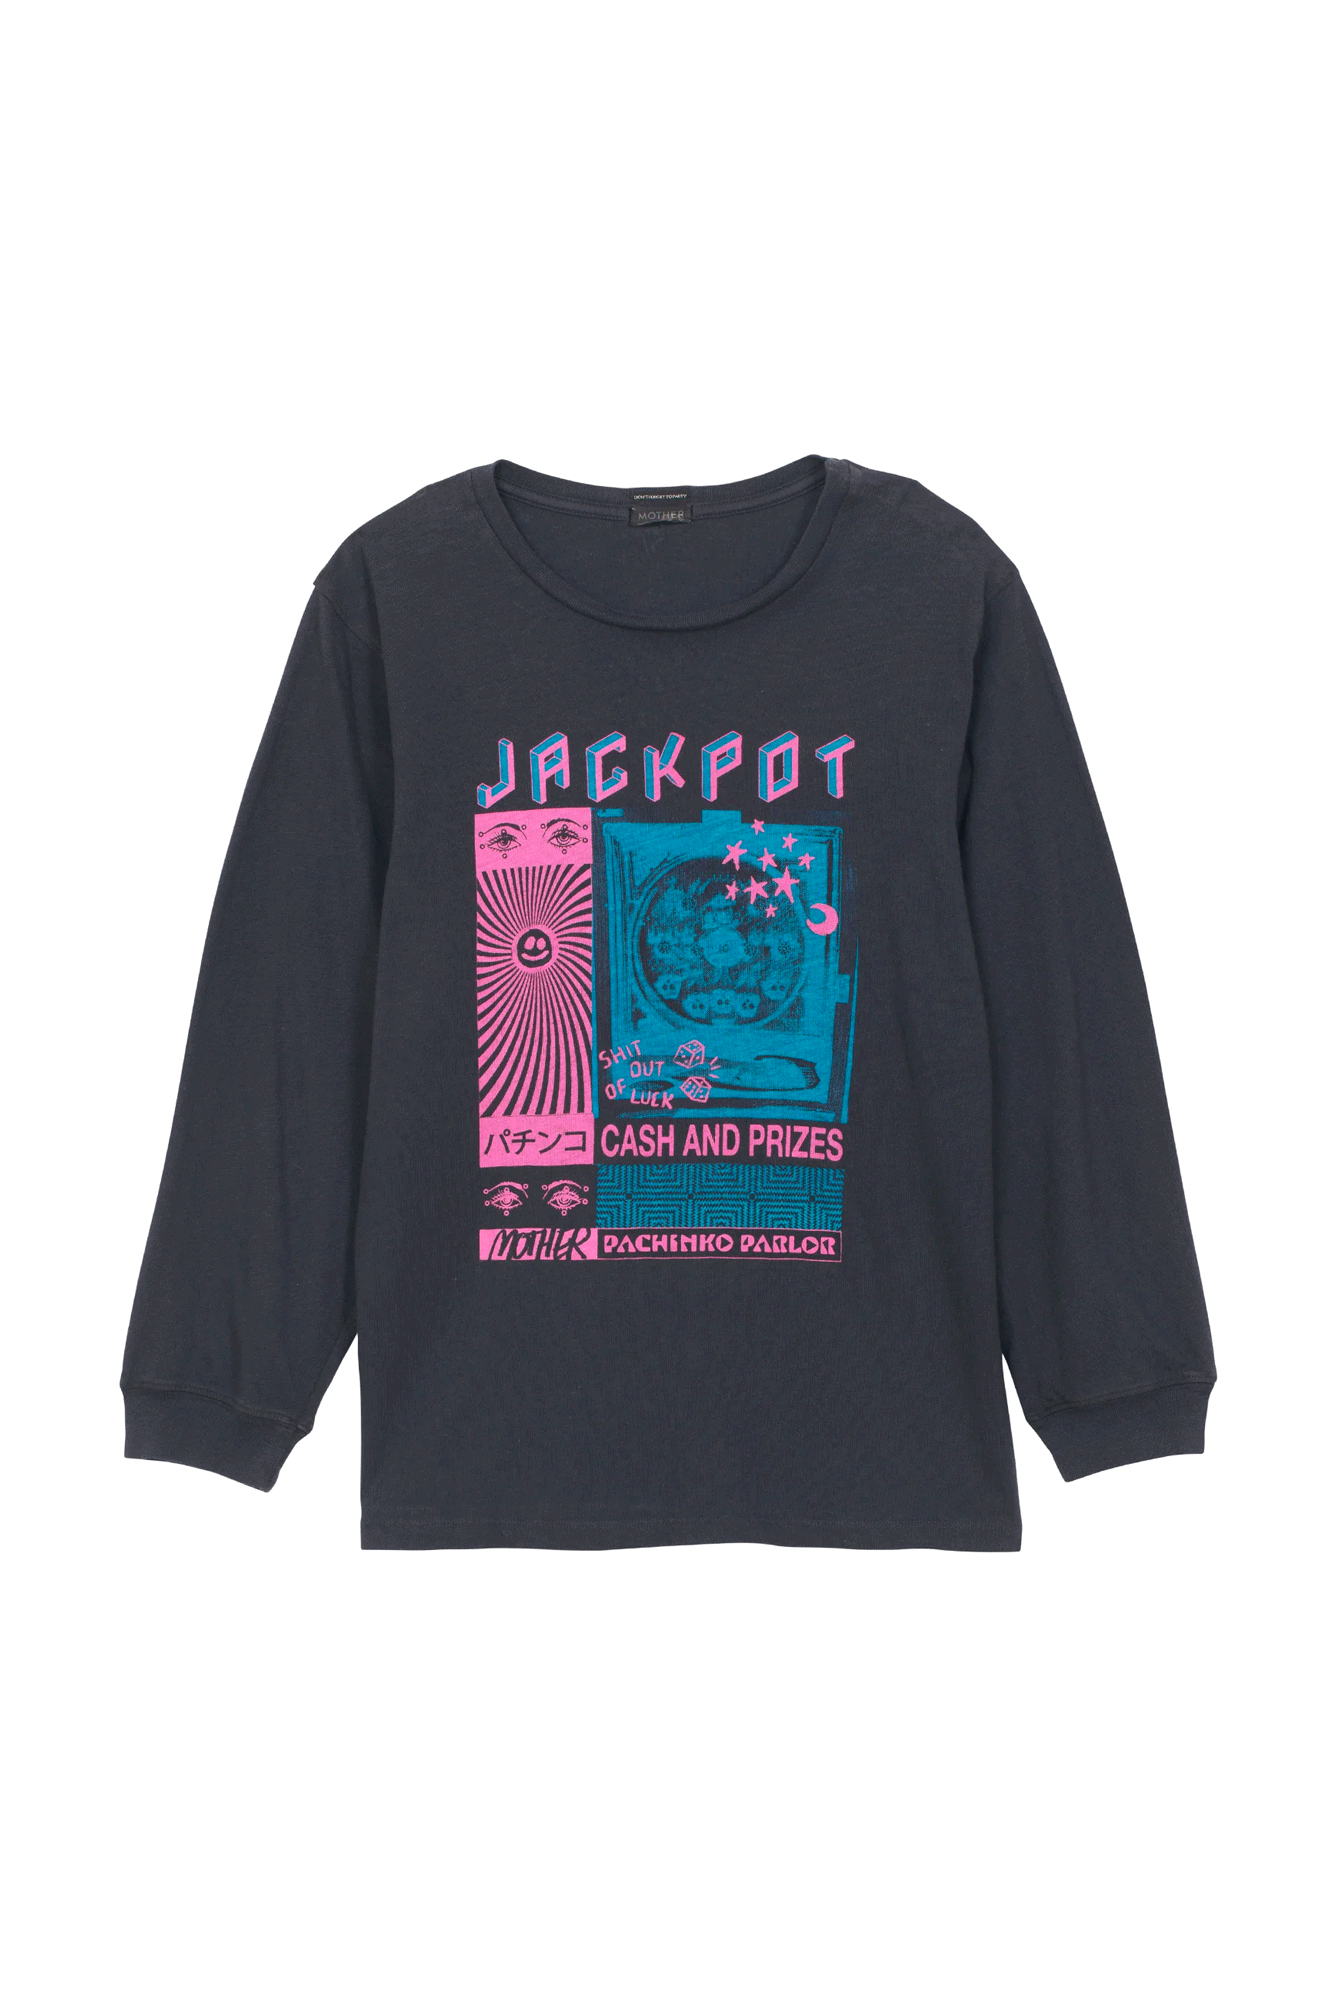 This vintage-style crewneck tee from Mother is made from recycled cotton for a comfortable, laid-back look. Featuring bold neon pink and blue graphics, the Jackpot Long Sleeve Rowdy is designed with an oversized fit to stand out.